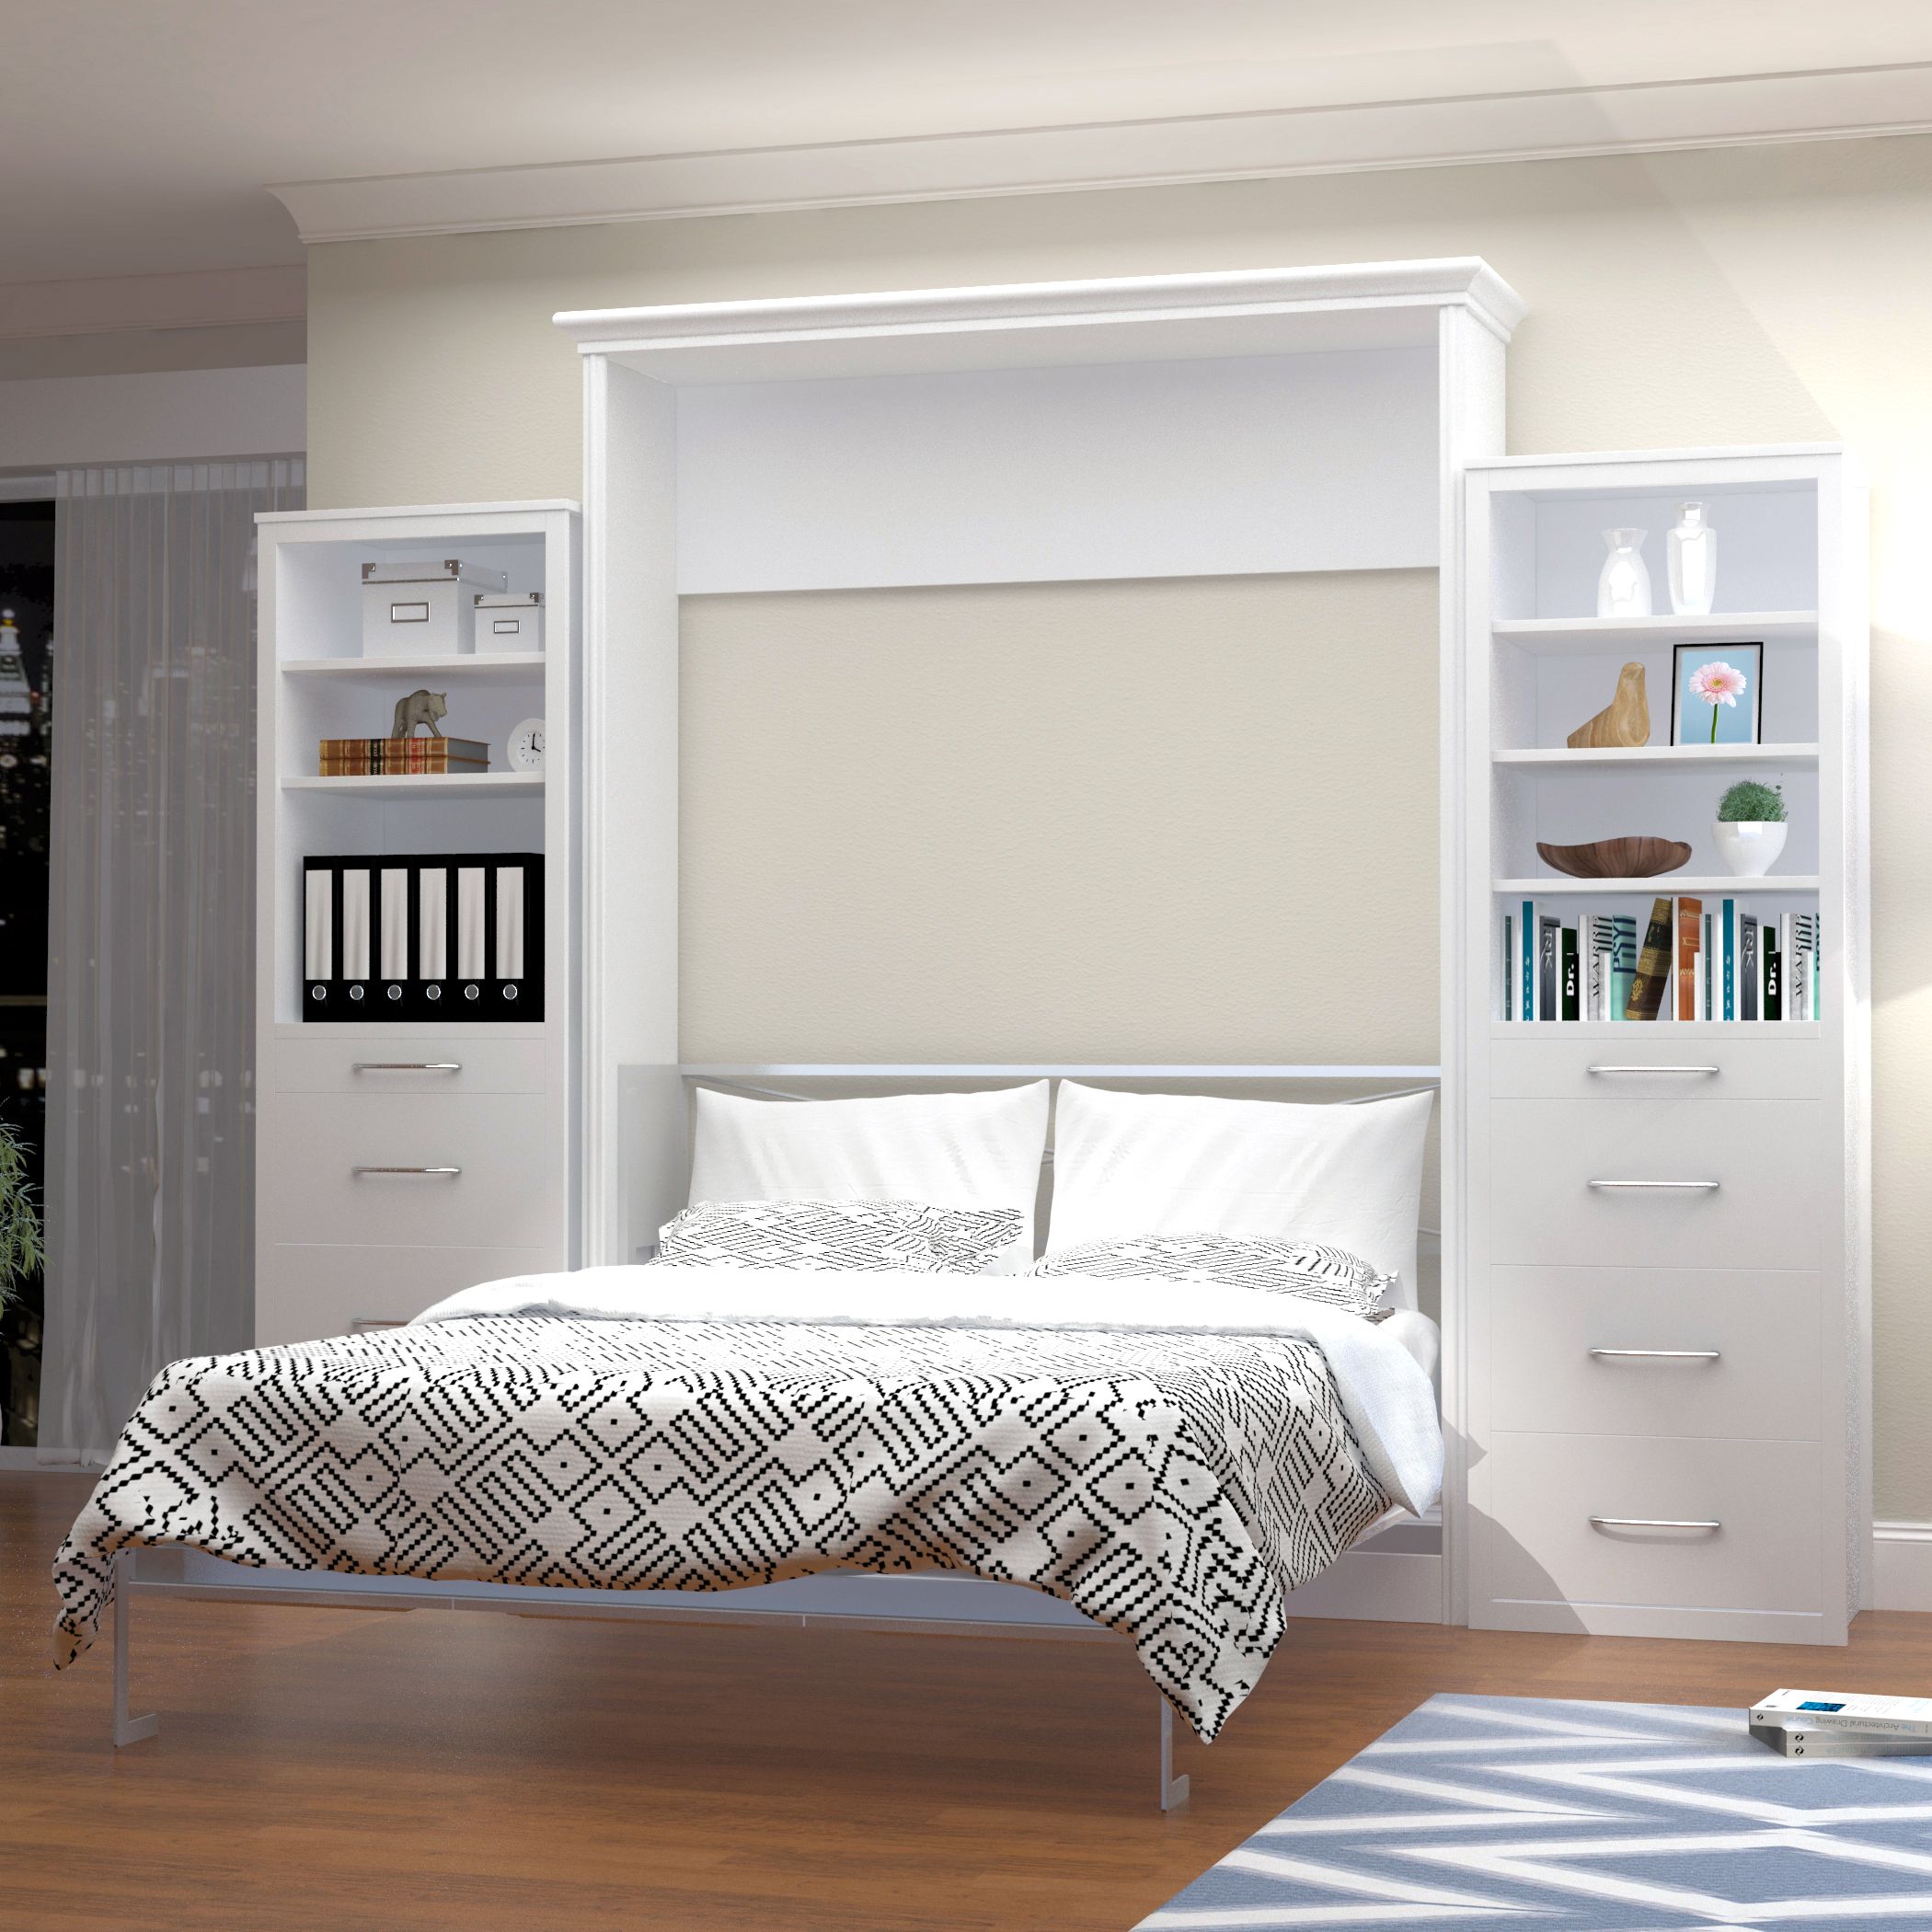 5 creative murphy bed ideas for your bedroom - this old house